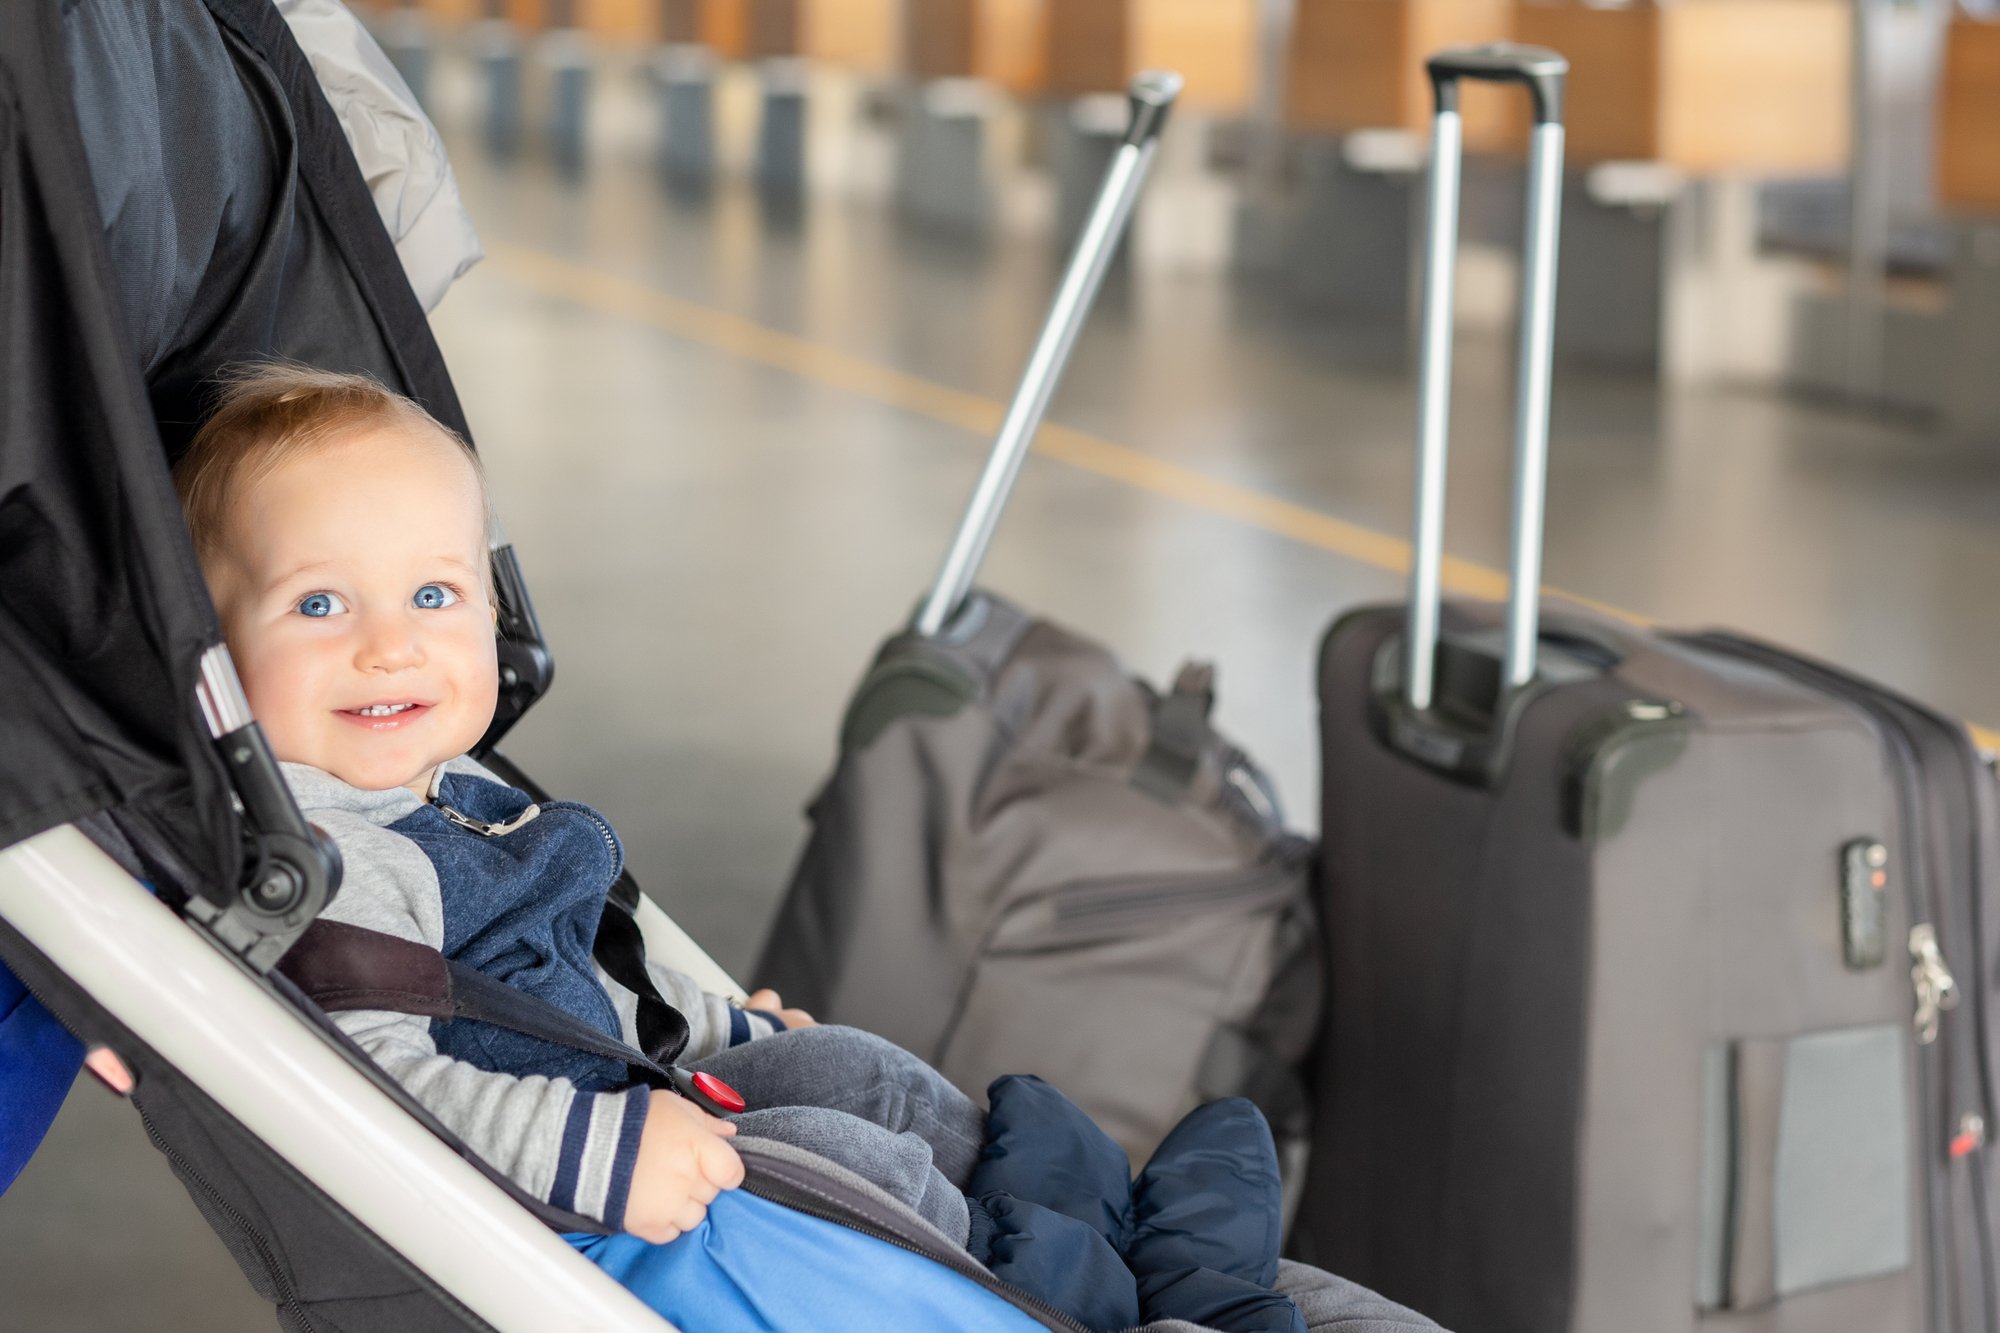 Renting baby gear means less luggage to lug during your travels